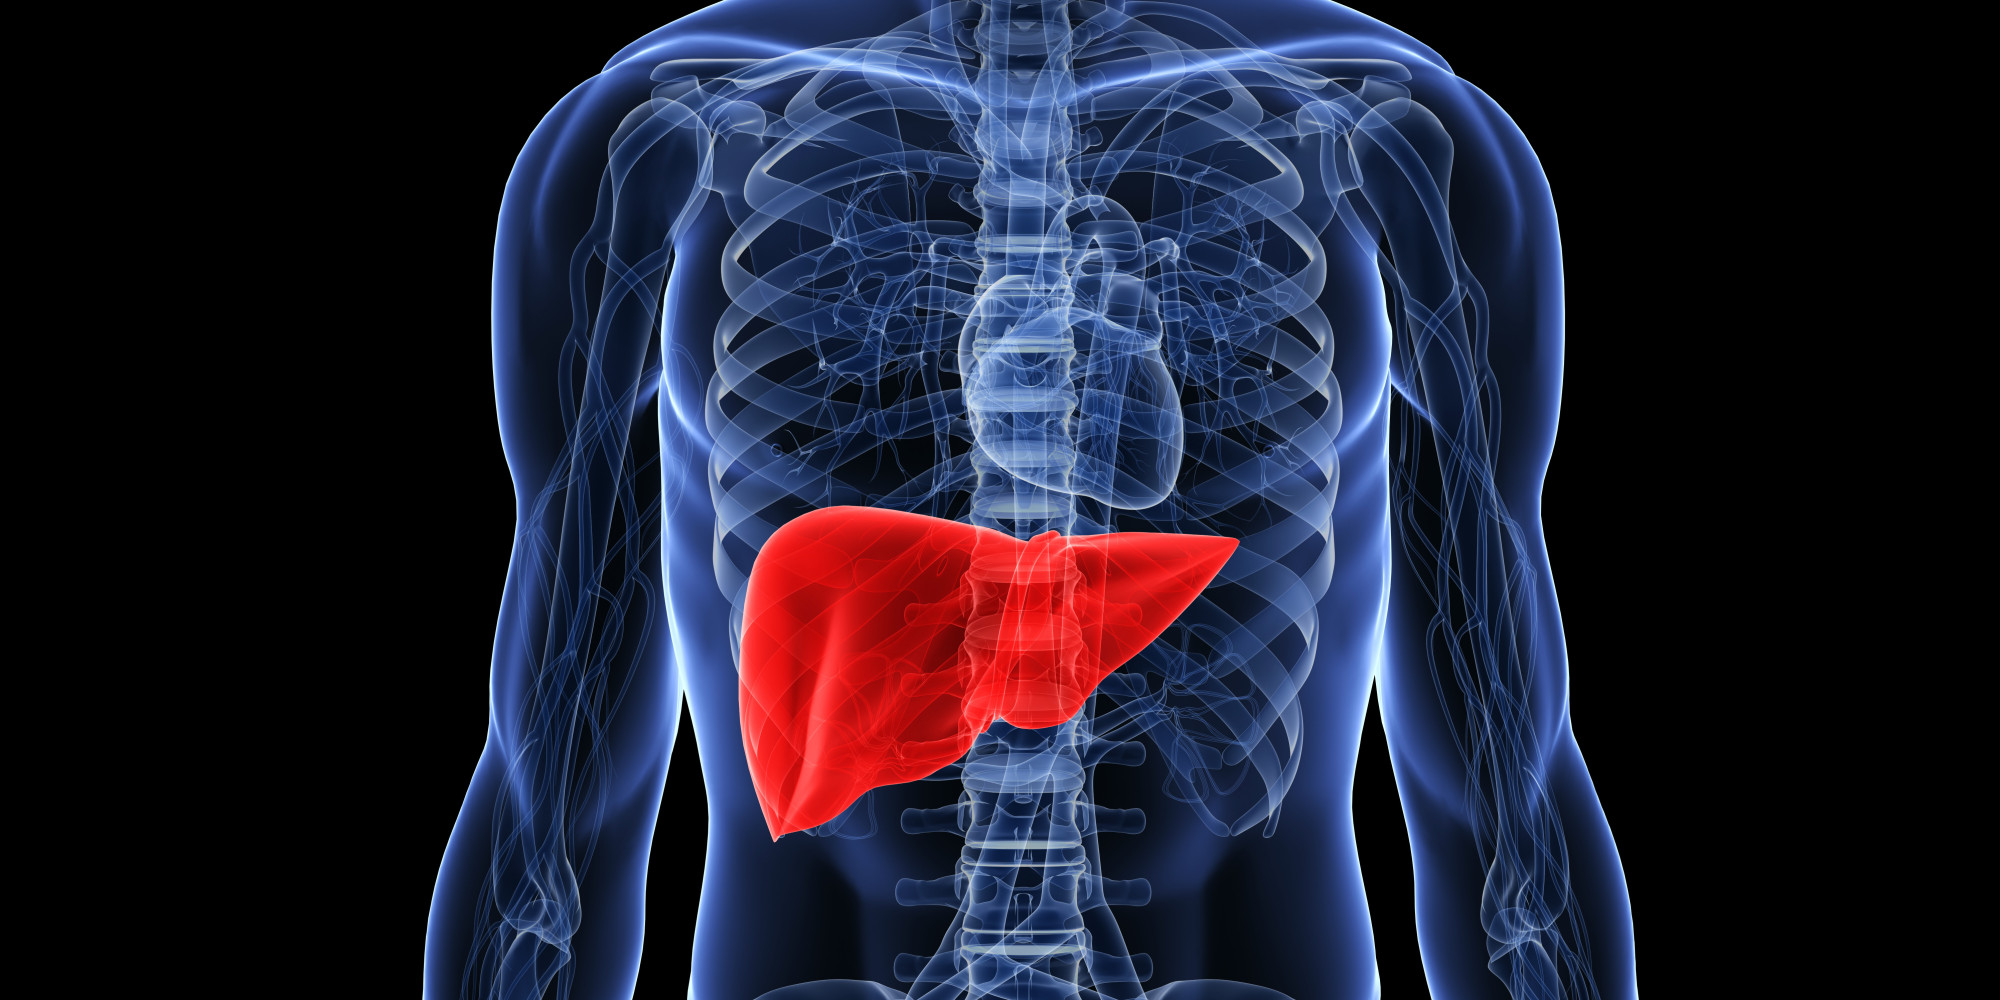 More Americans Are Dying of Cirrhosis and Liver Cancer